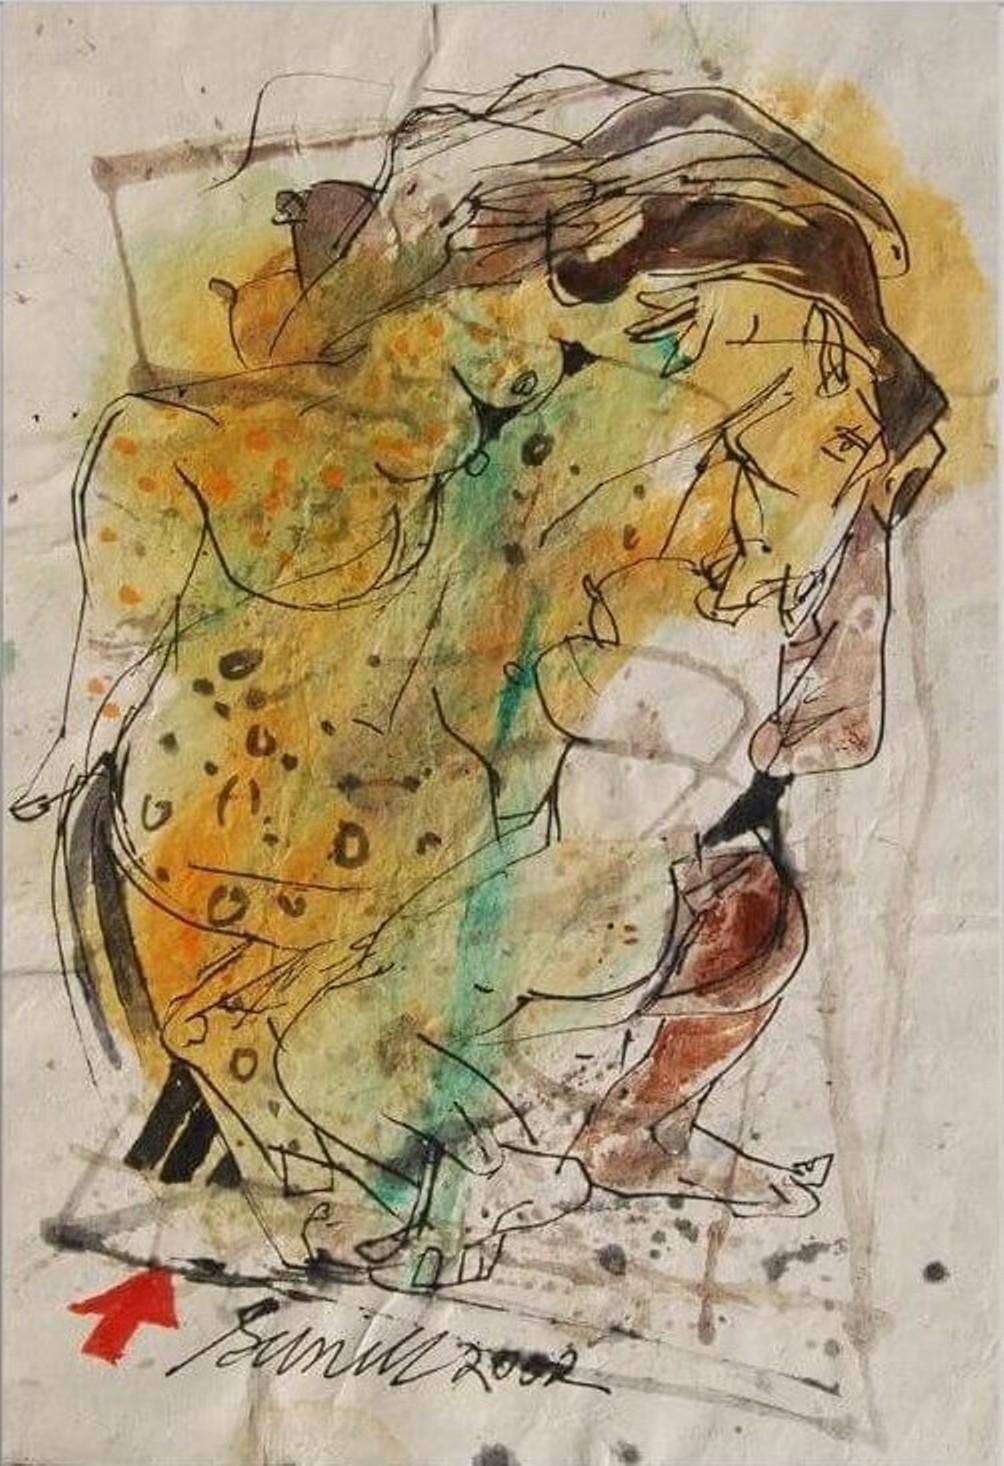 Sunil Das - Color Based Drawings, 
13 x 9.5 inches Unframed sizes
Acrylic, Watercolour, Pen &Ink on Handmade Paper, 2002
( Unframed & Delivered )

Sunil Das (1939-2015) was a Master Modern Indian Artist from Bengal. Extremely successful right from